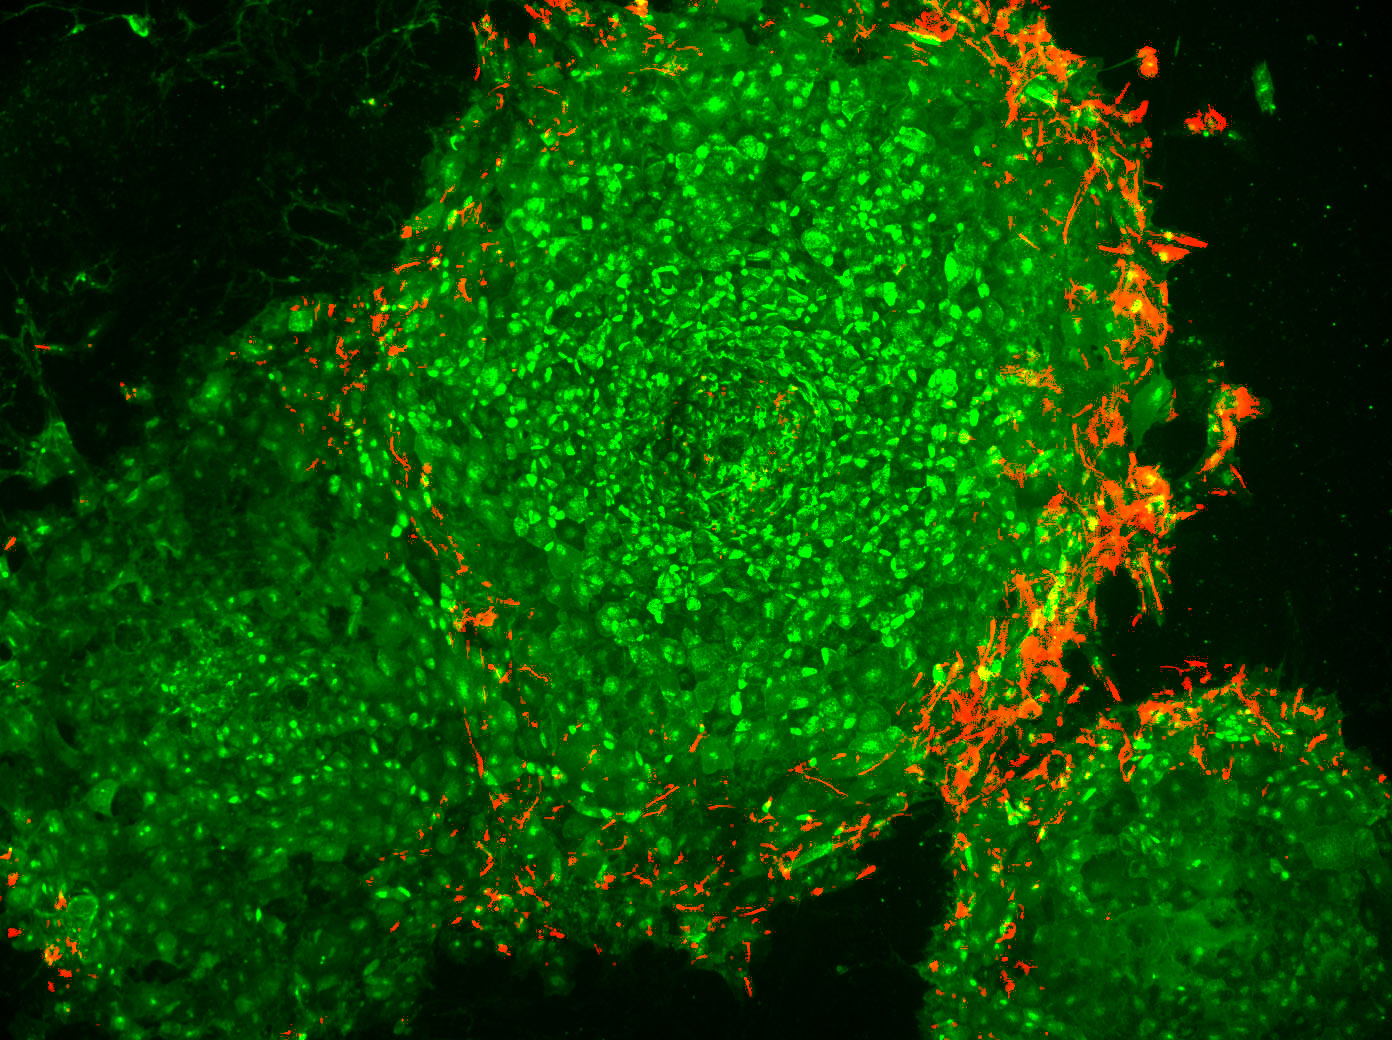 Human embryonic stem cells stained with Tra-1-60 (green) - a stem cell marker and nestin (red), a ne